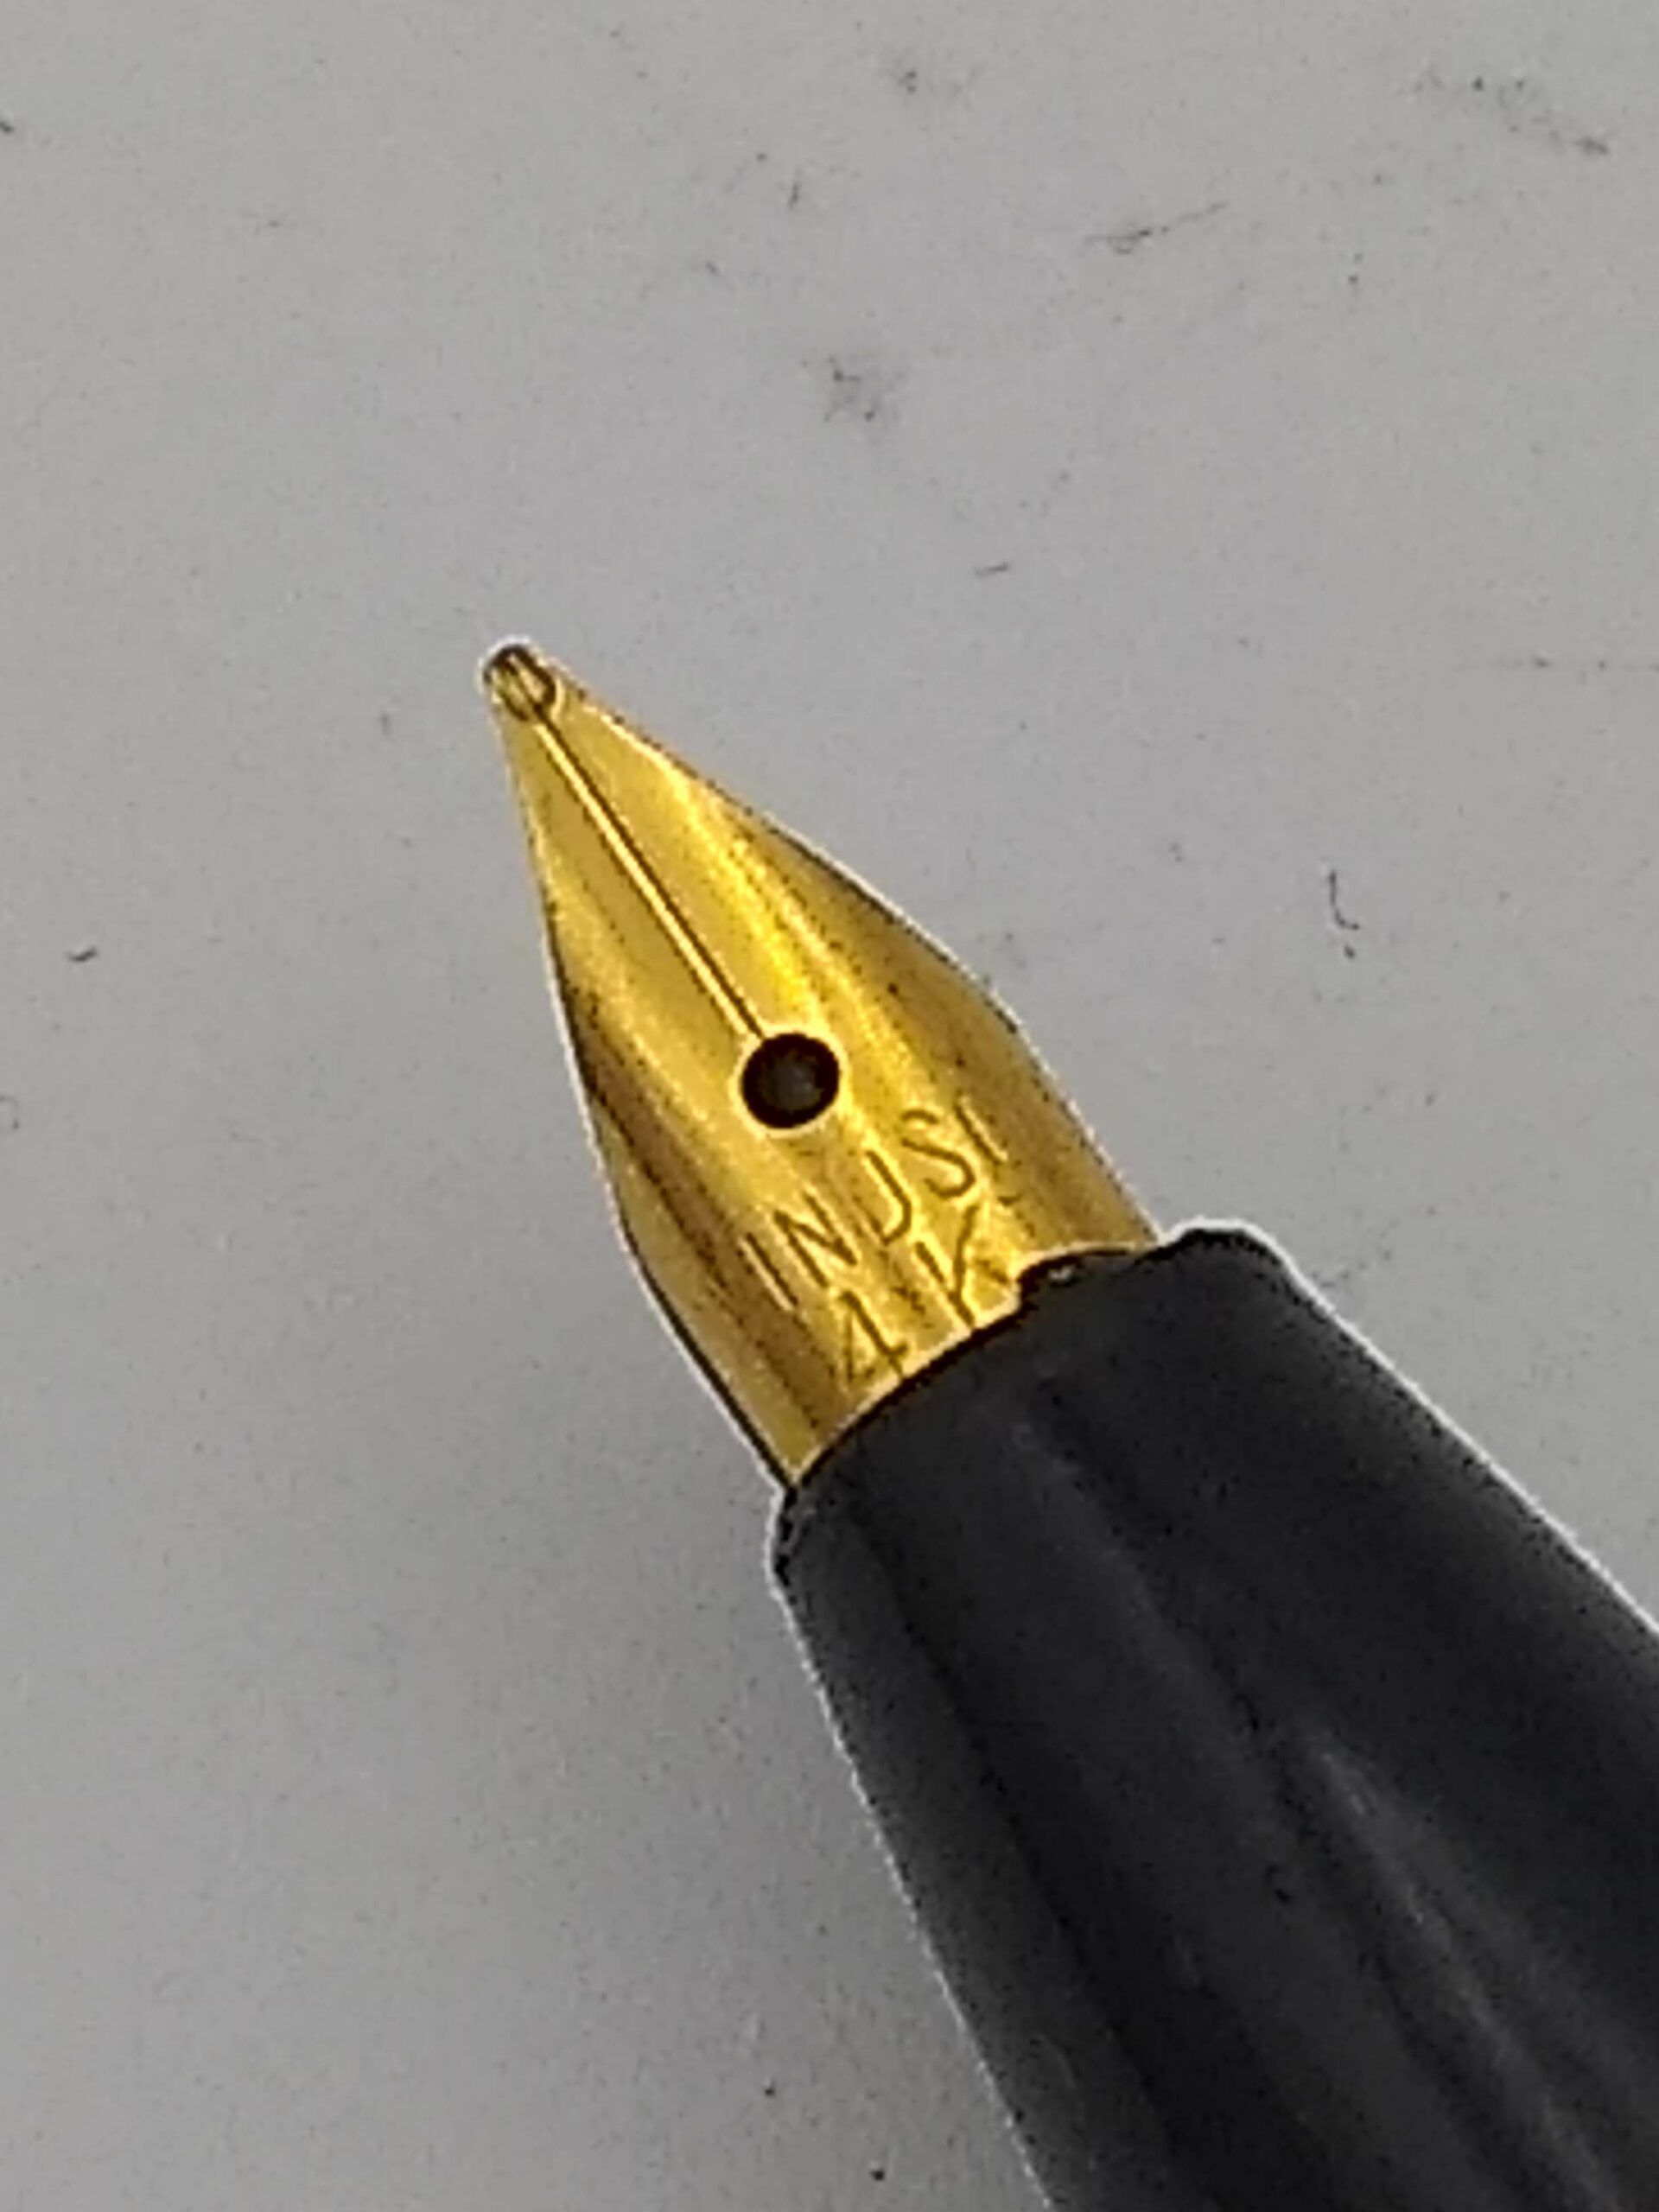 Gravitas Pens - Very Negative First Experience : r/fountainpens